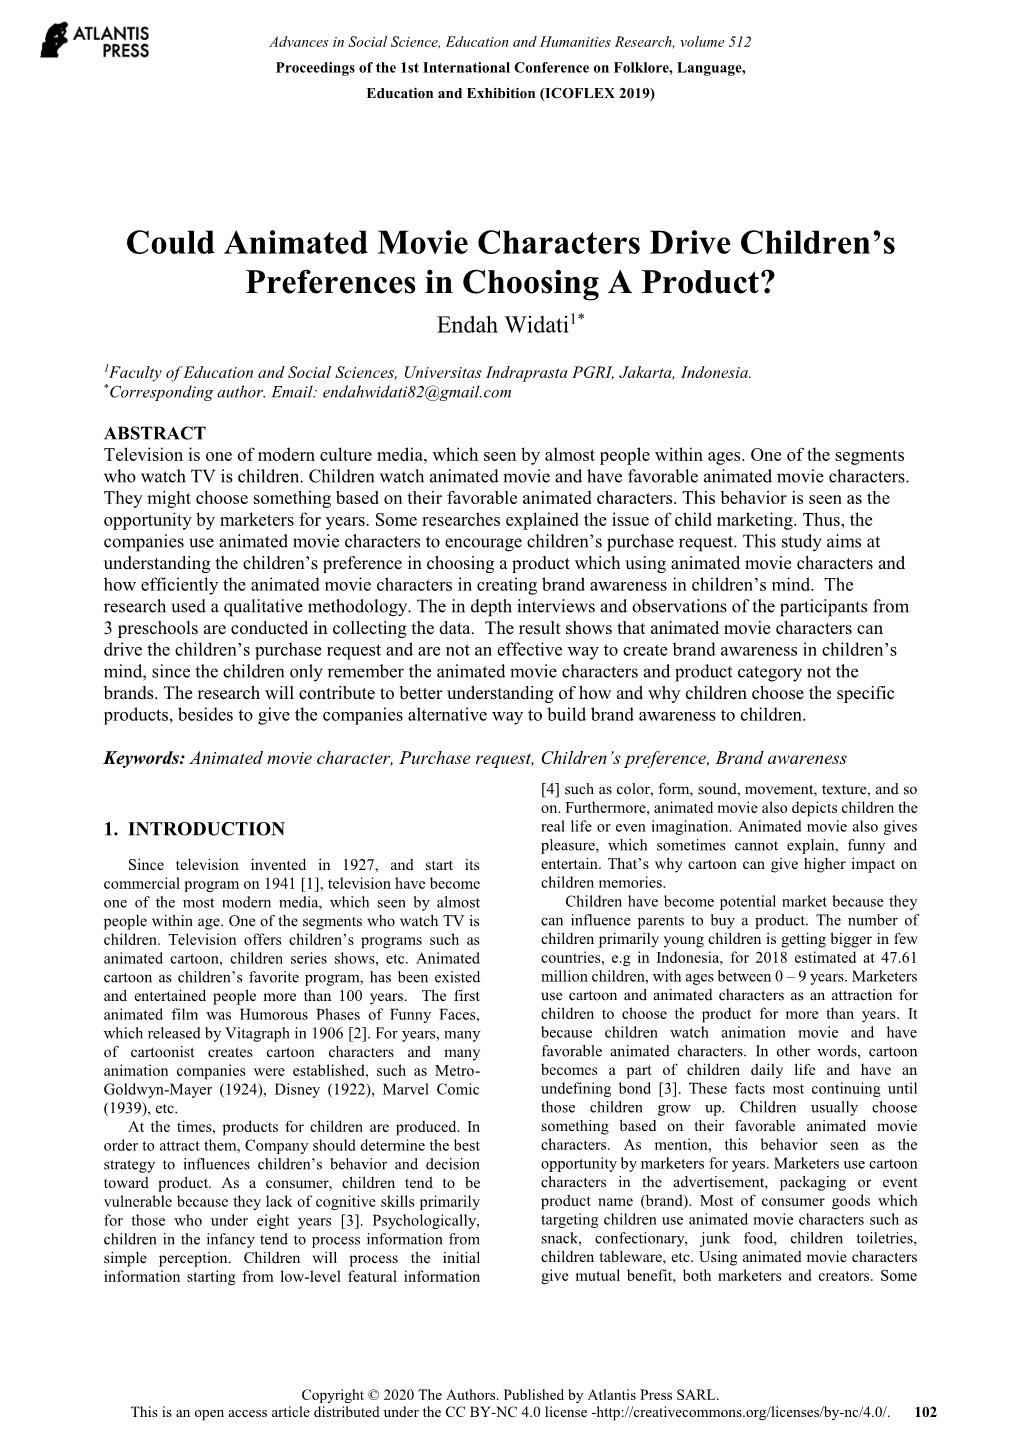 Could Animated Movie Characters Drive Children's Preferences In